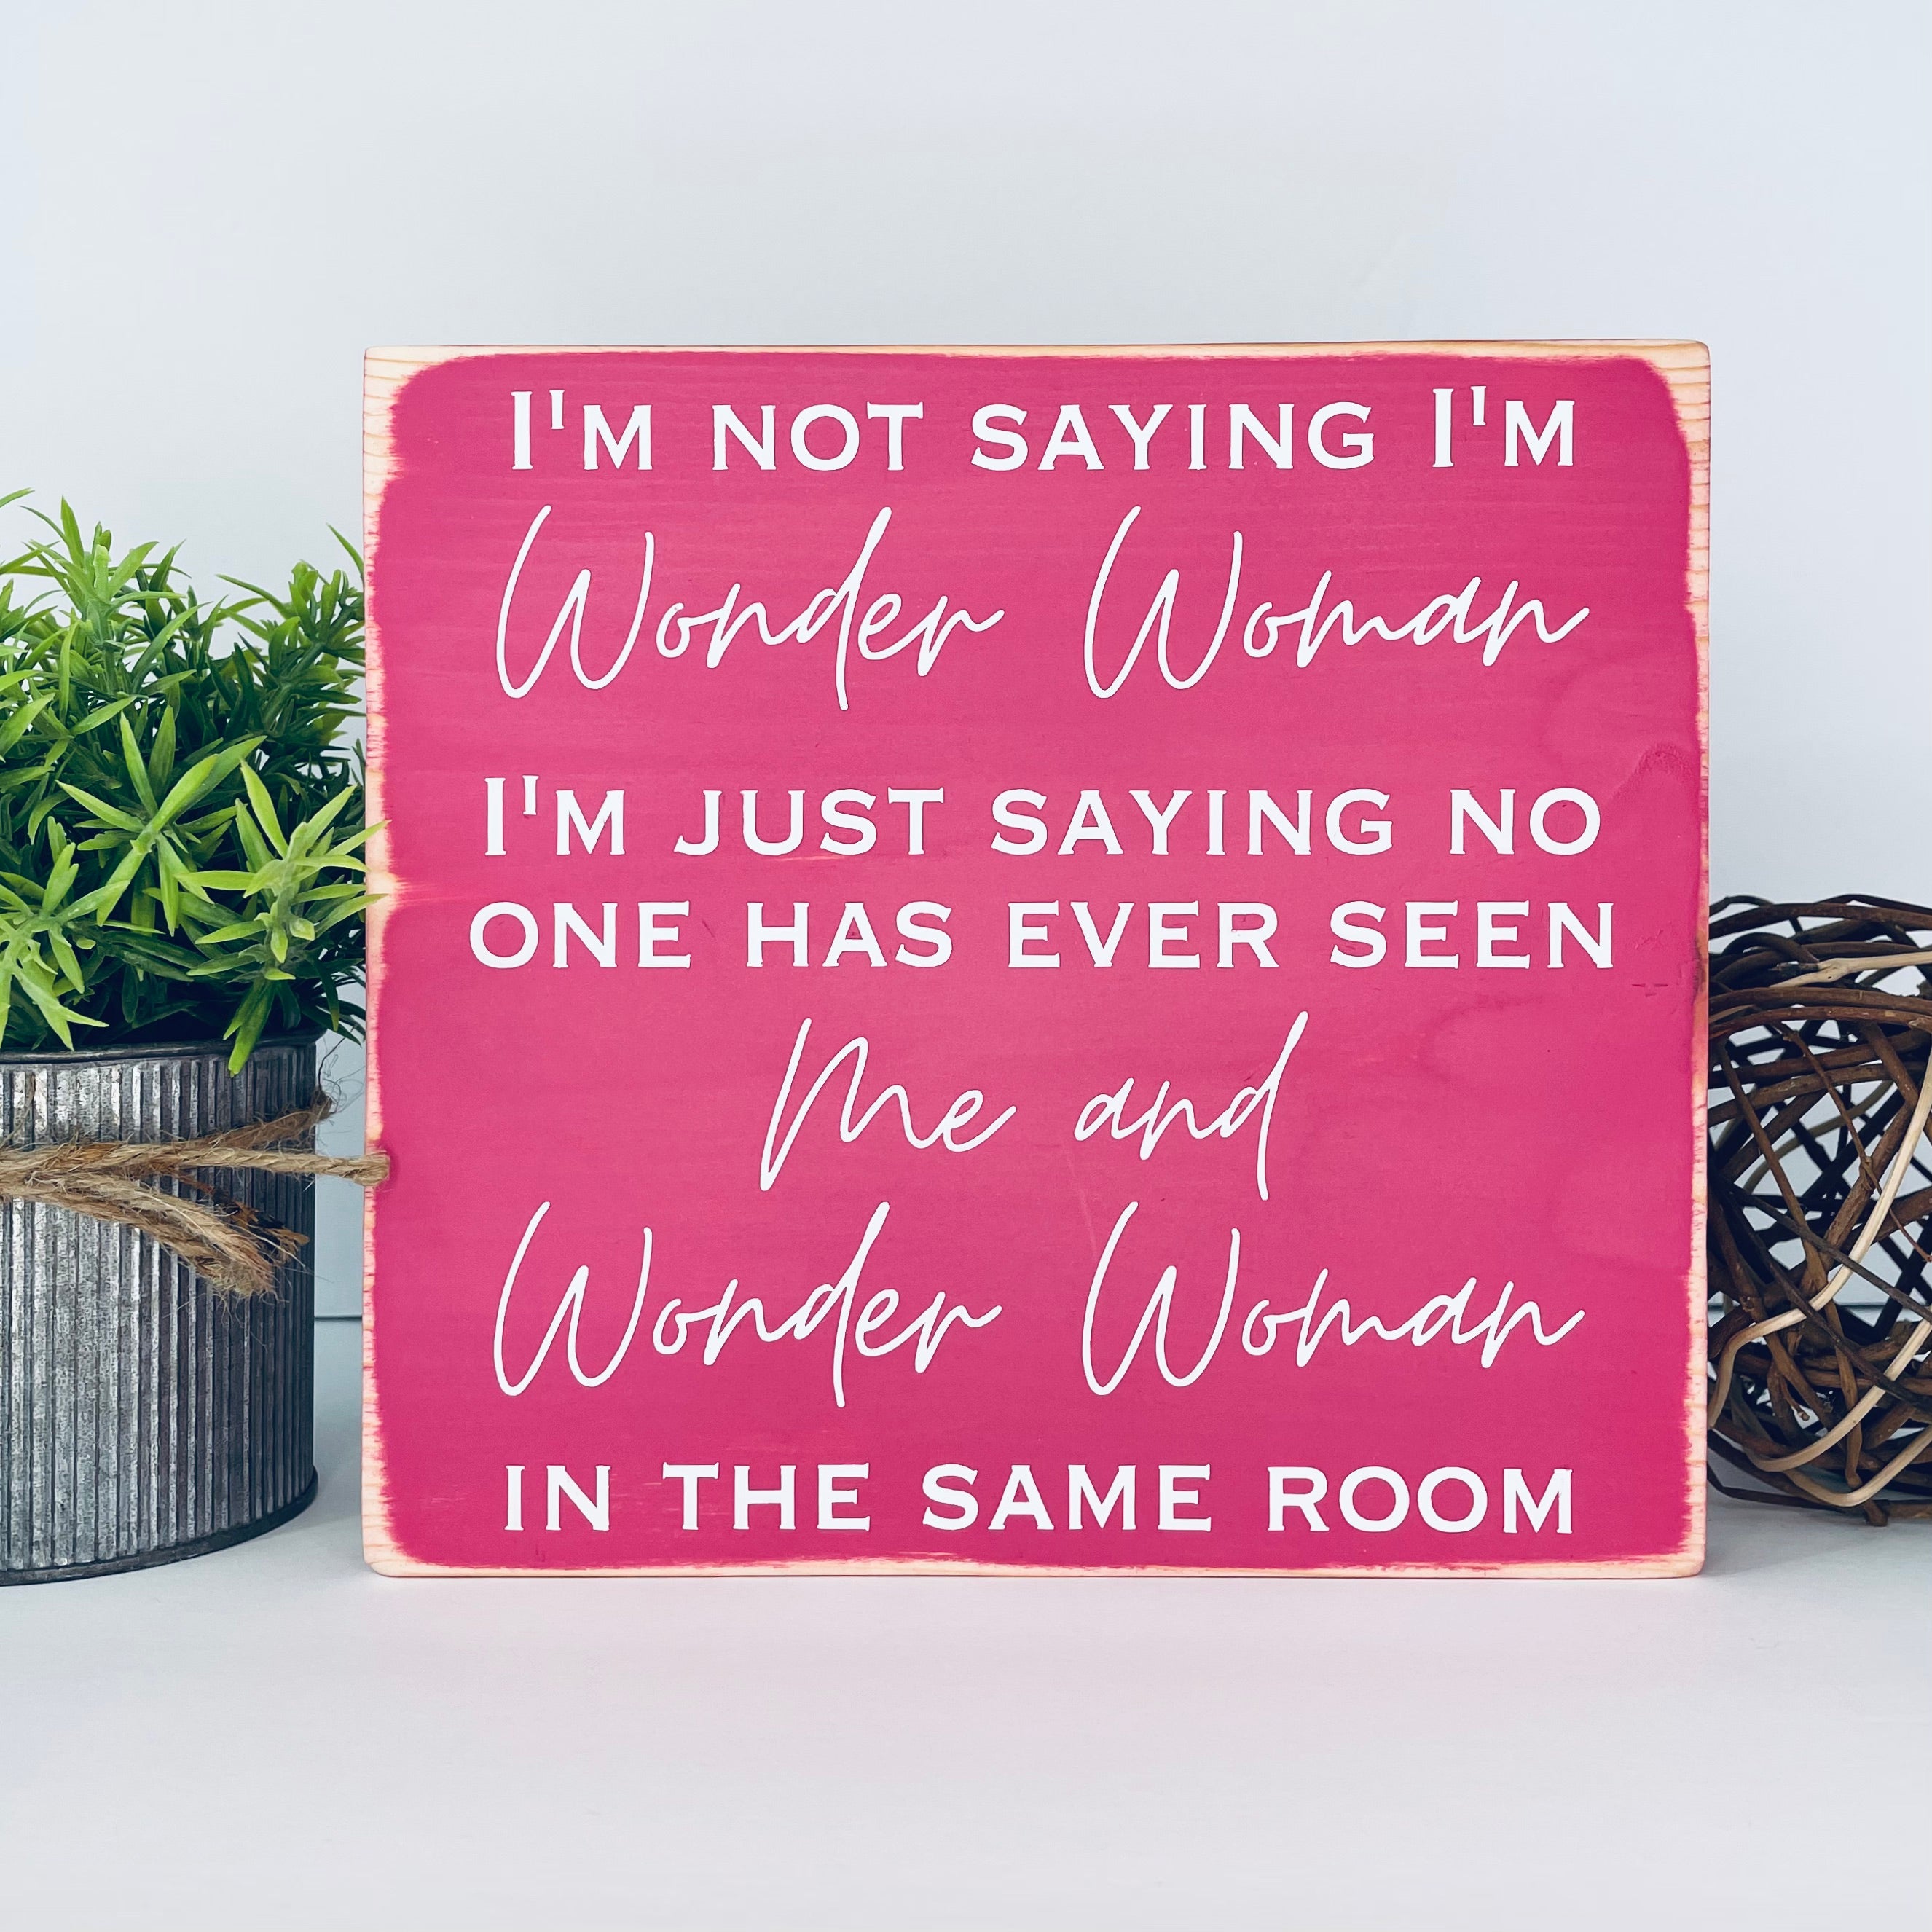 medium sized square wood sign painted pink with white lettering that reads, " I'm not saying I'm Wonder Woman, I'm just saying no one has ever seen me and Wonder Woman in the same room". All text is in all caps except for "Wonder Woman" and "Me and Wonder Woman". Text is centered, takes up the entire area and is on 7 lines. Glossy finish.